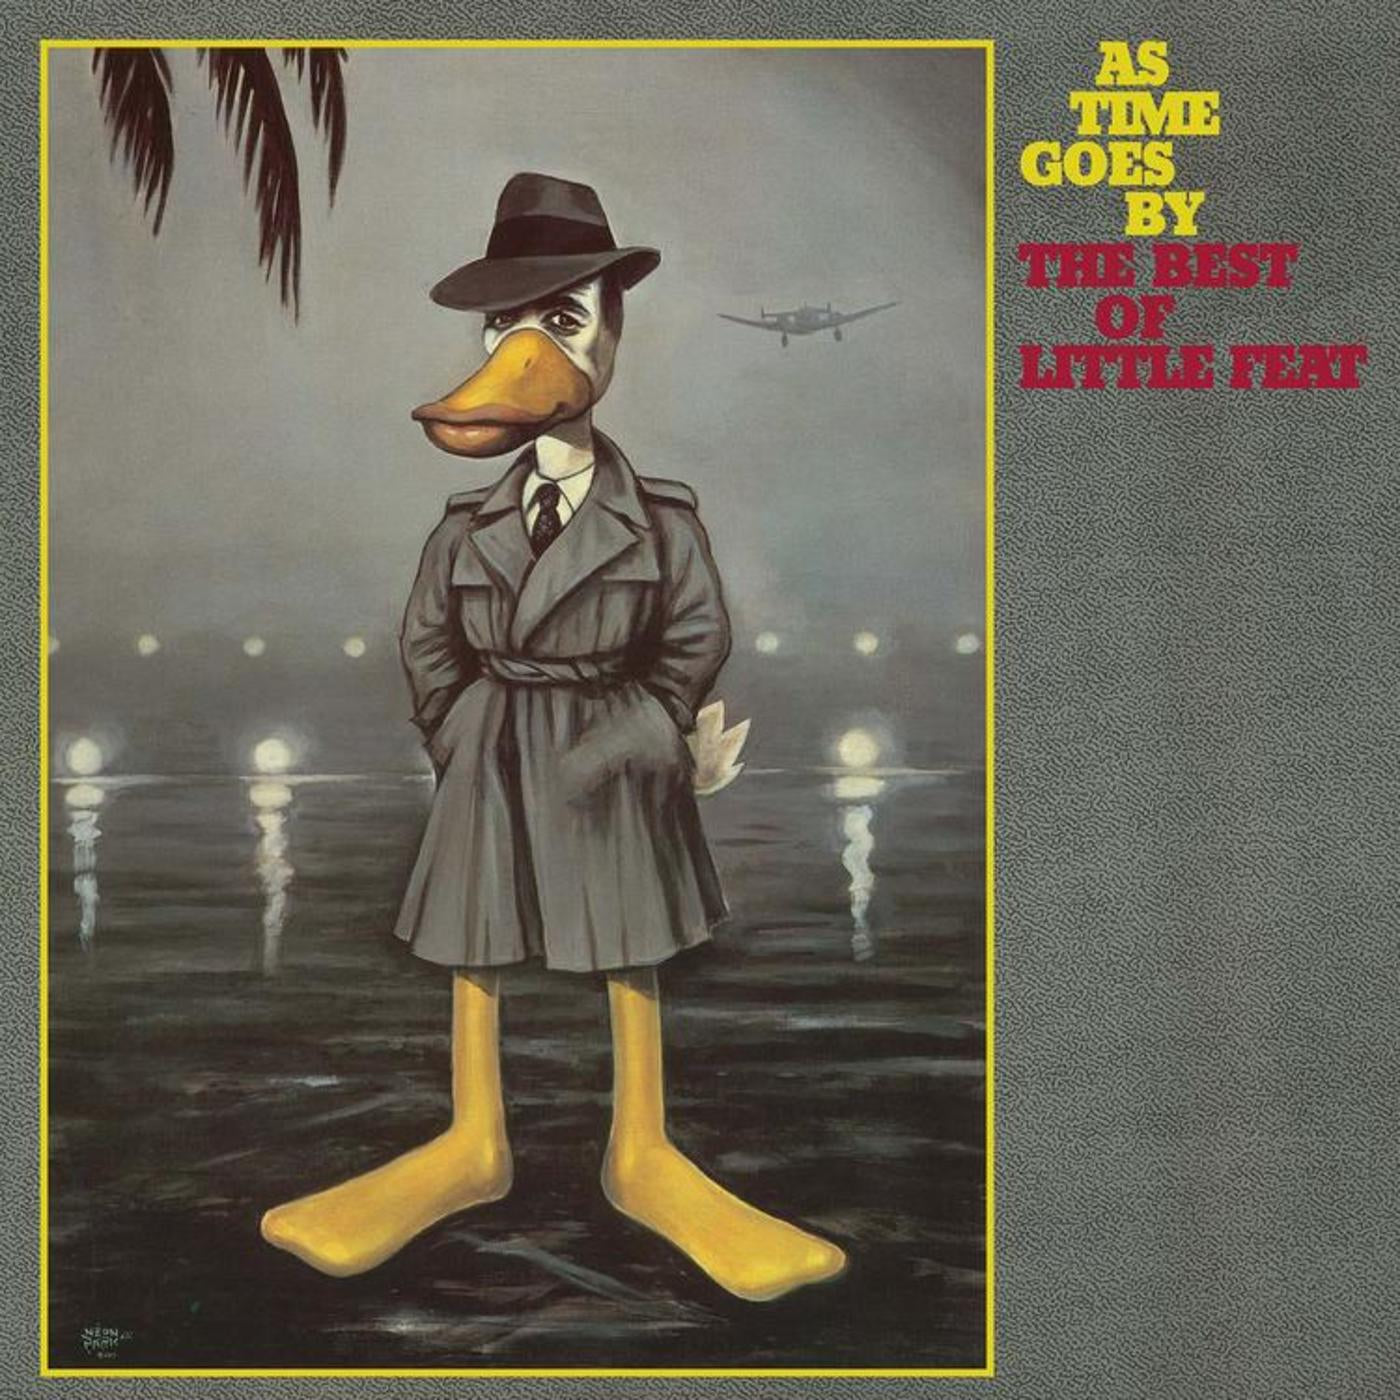 Little Feat - As Time Goes By (Best Of)